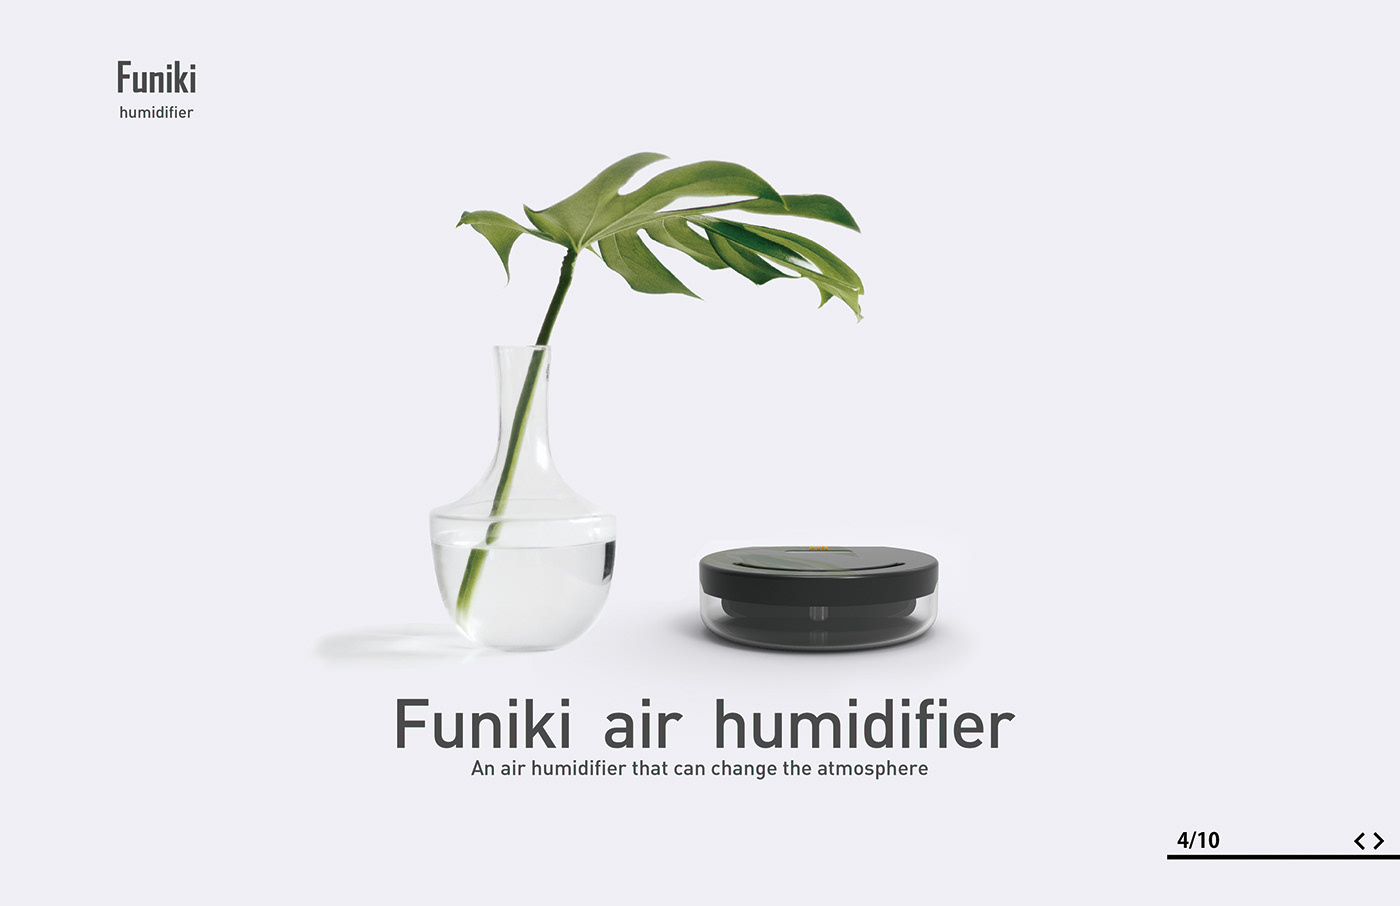 humidifier redesign suggestive